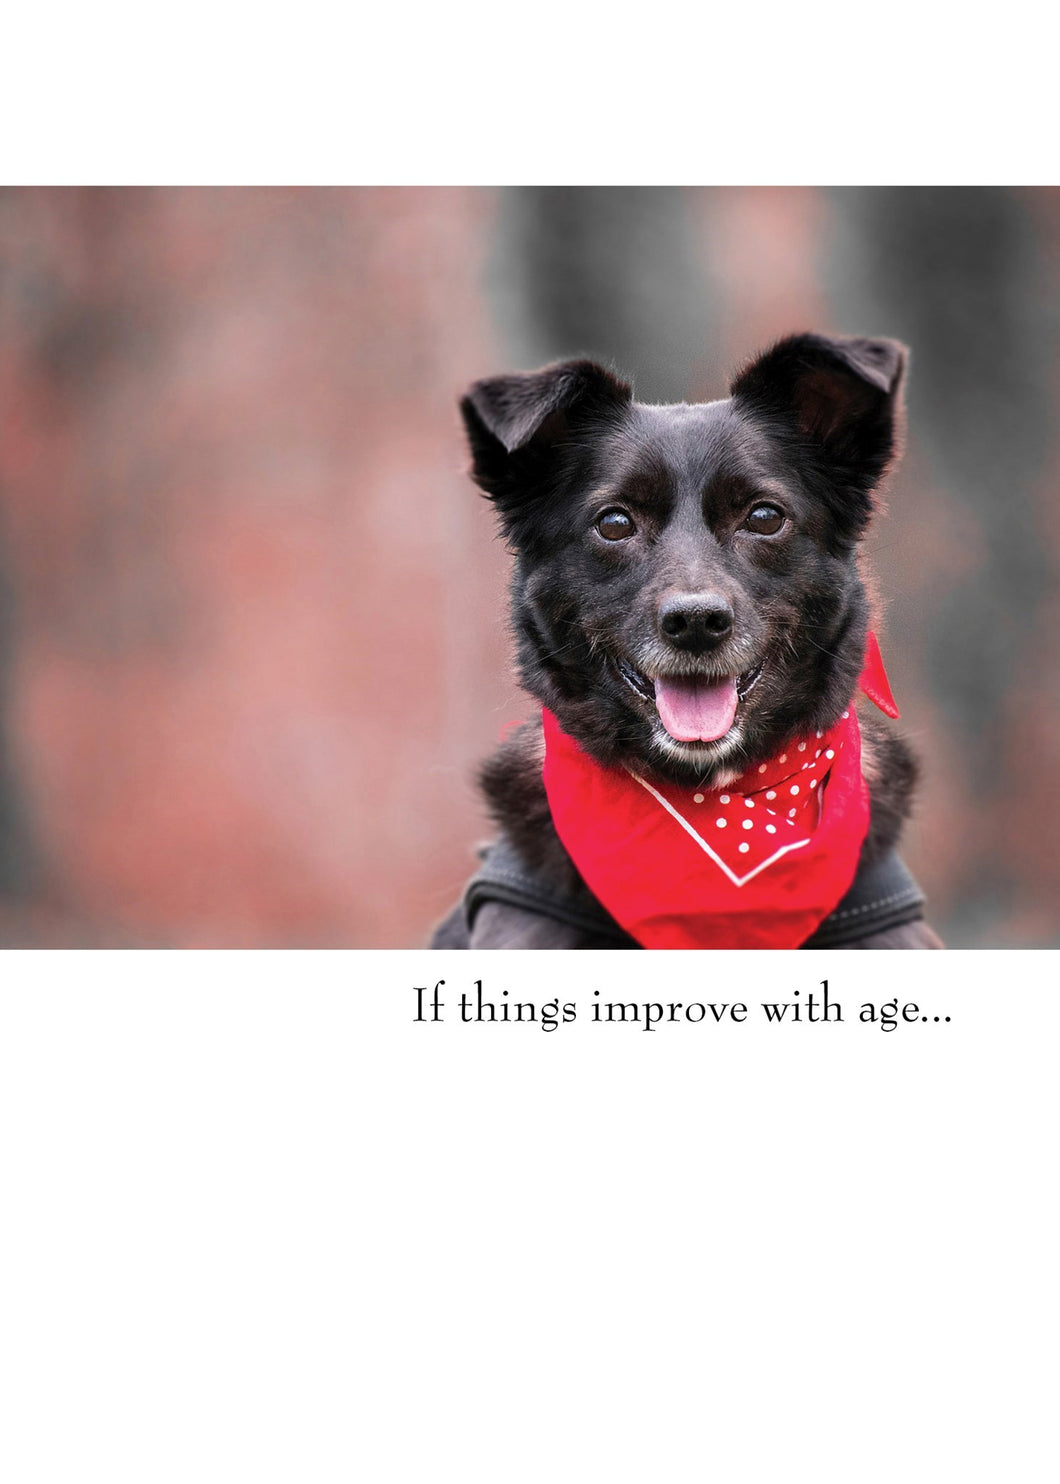 a colour photo of a perky black dog looks like it is smiling wearing a red bandana